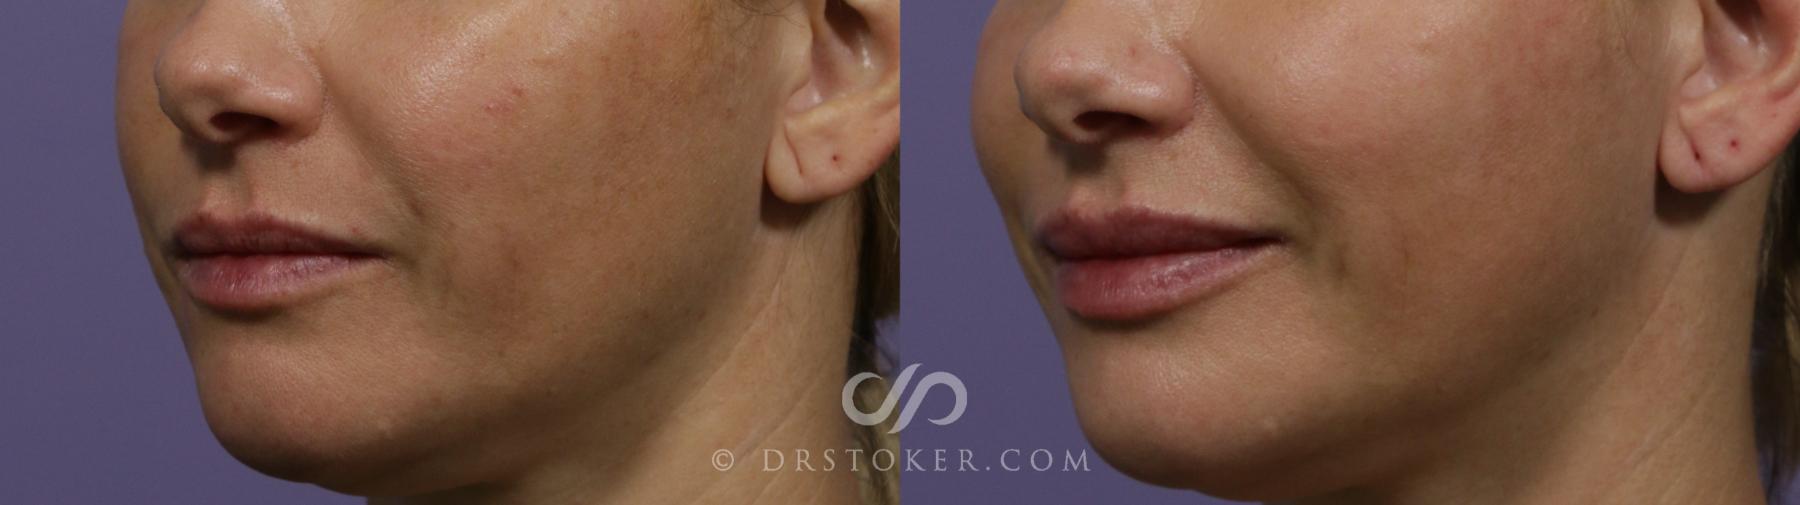 Before & After Lip Fillers/Augmentation Case 1854 Left Oblique View in Los Angeles, CA